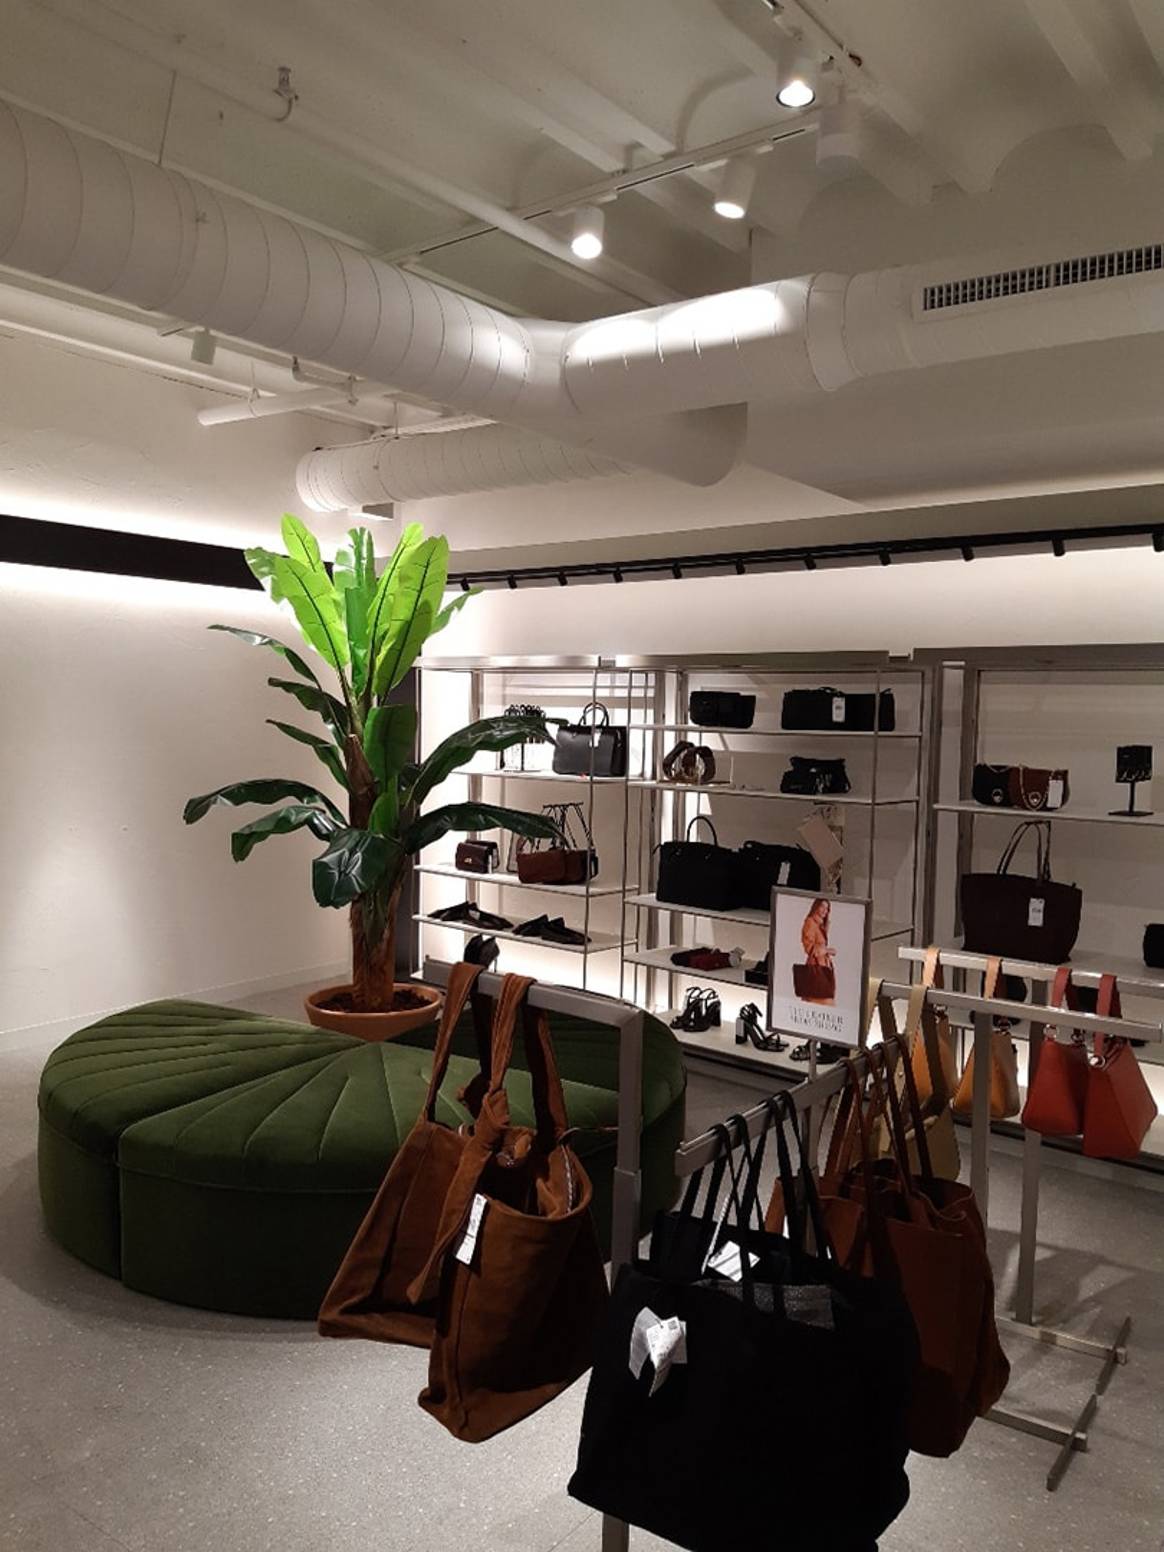 In pictures: Mango opens refurbished and expanded Amsterdam store